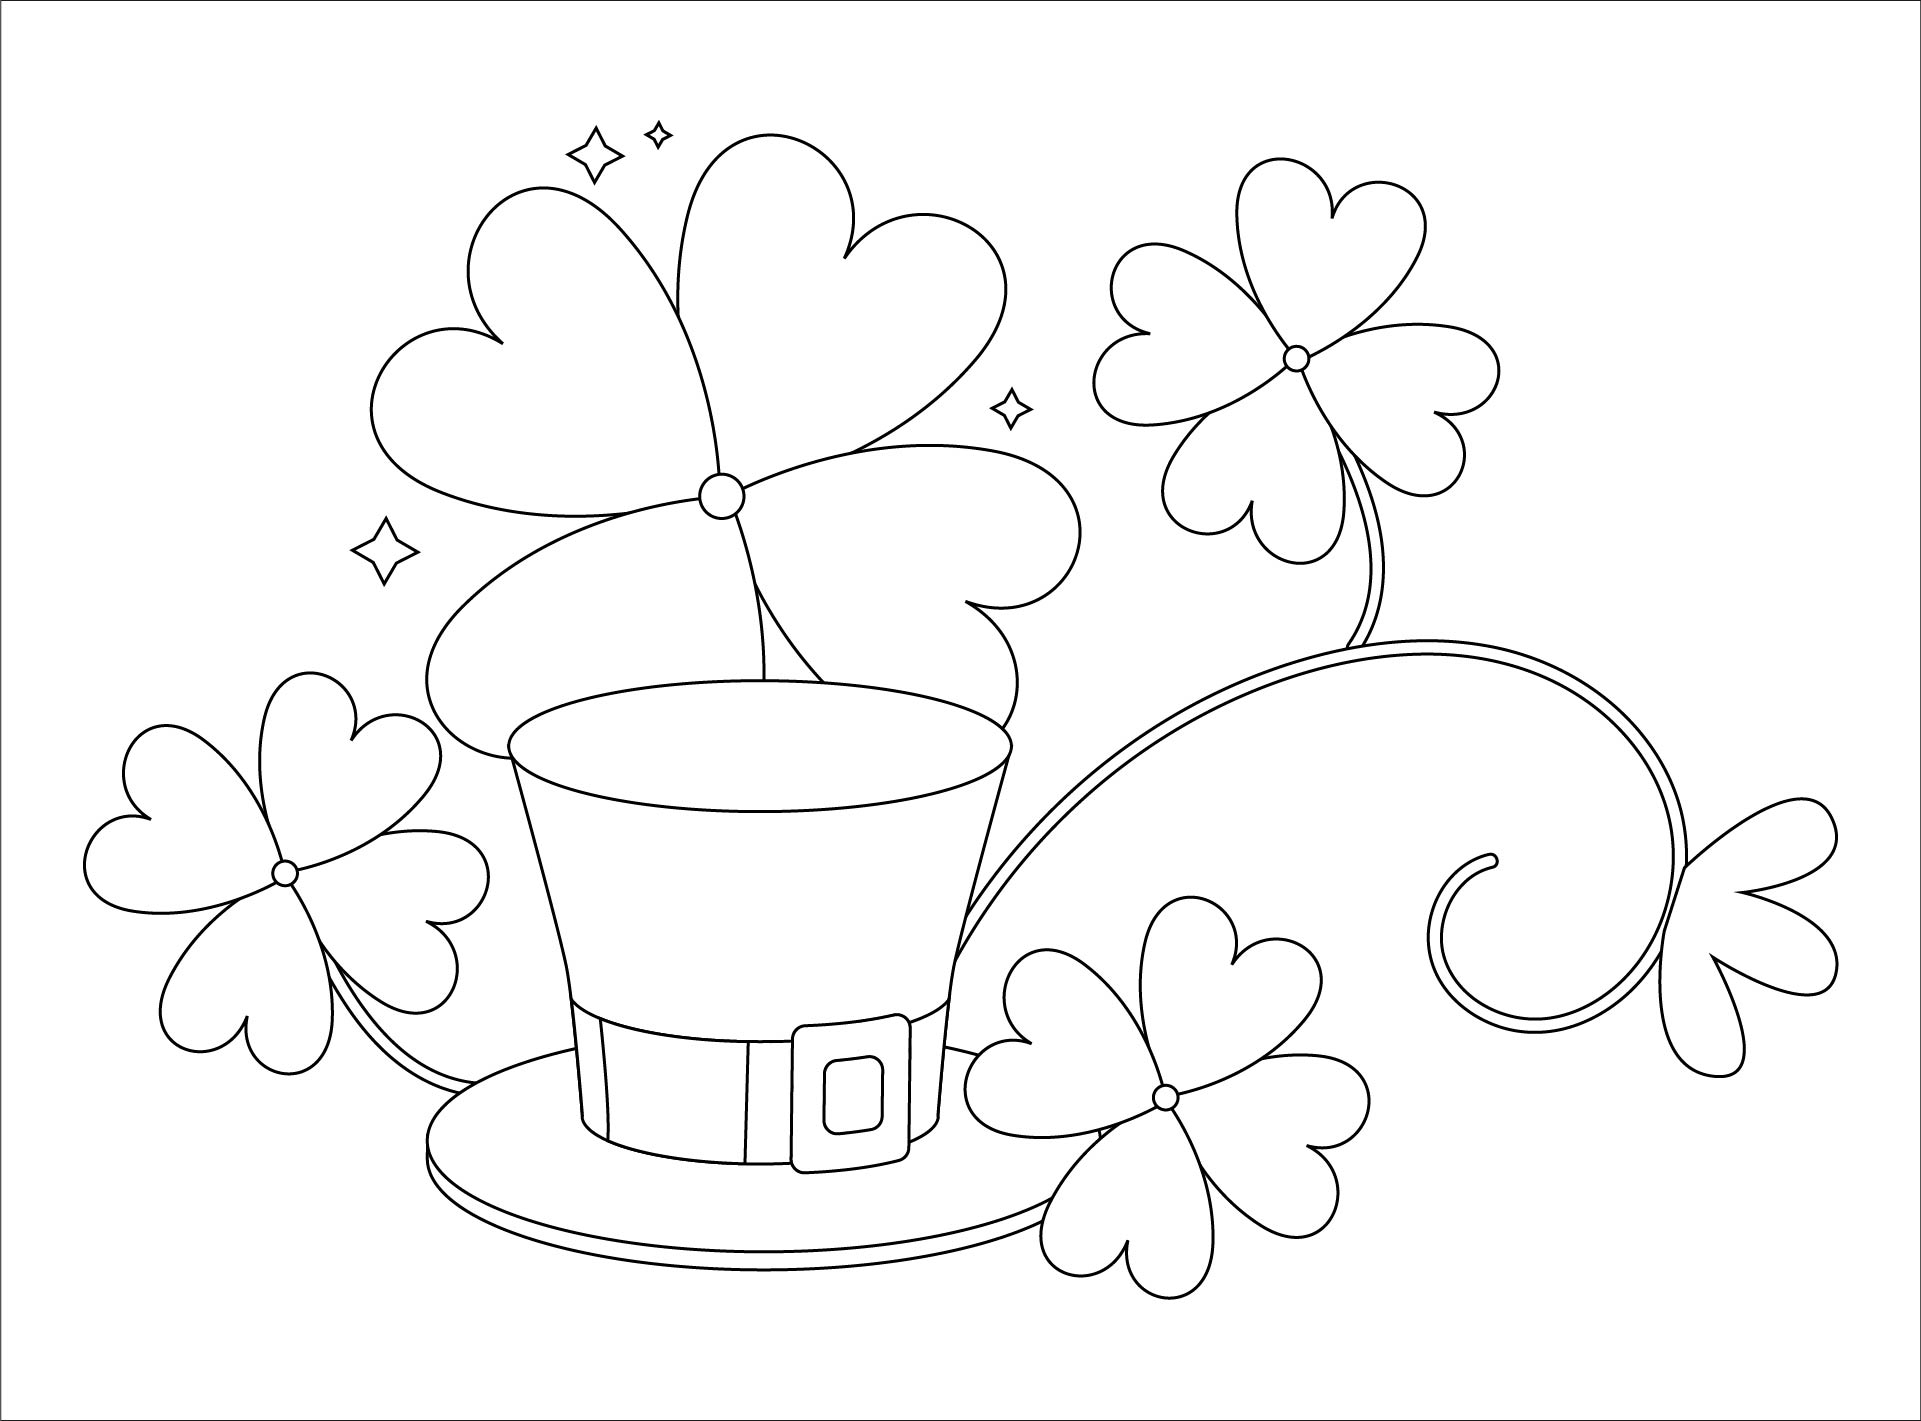 Printable Four Leaf Clover Coloring Pages